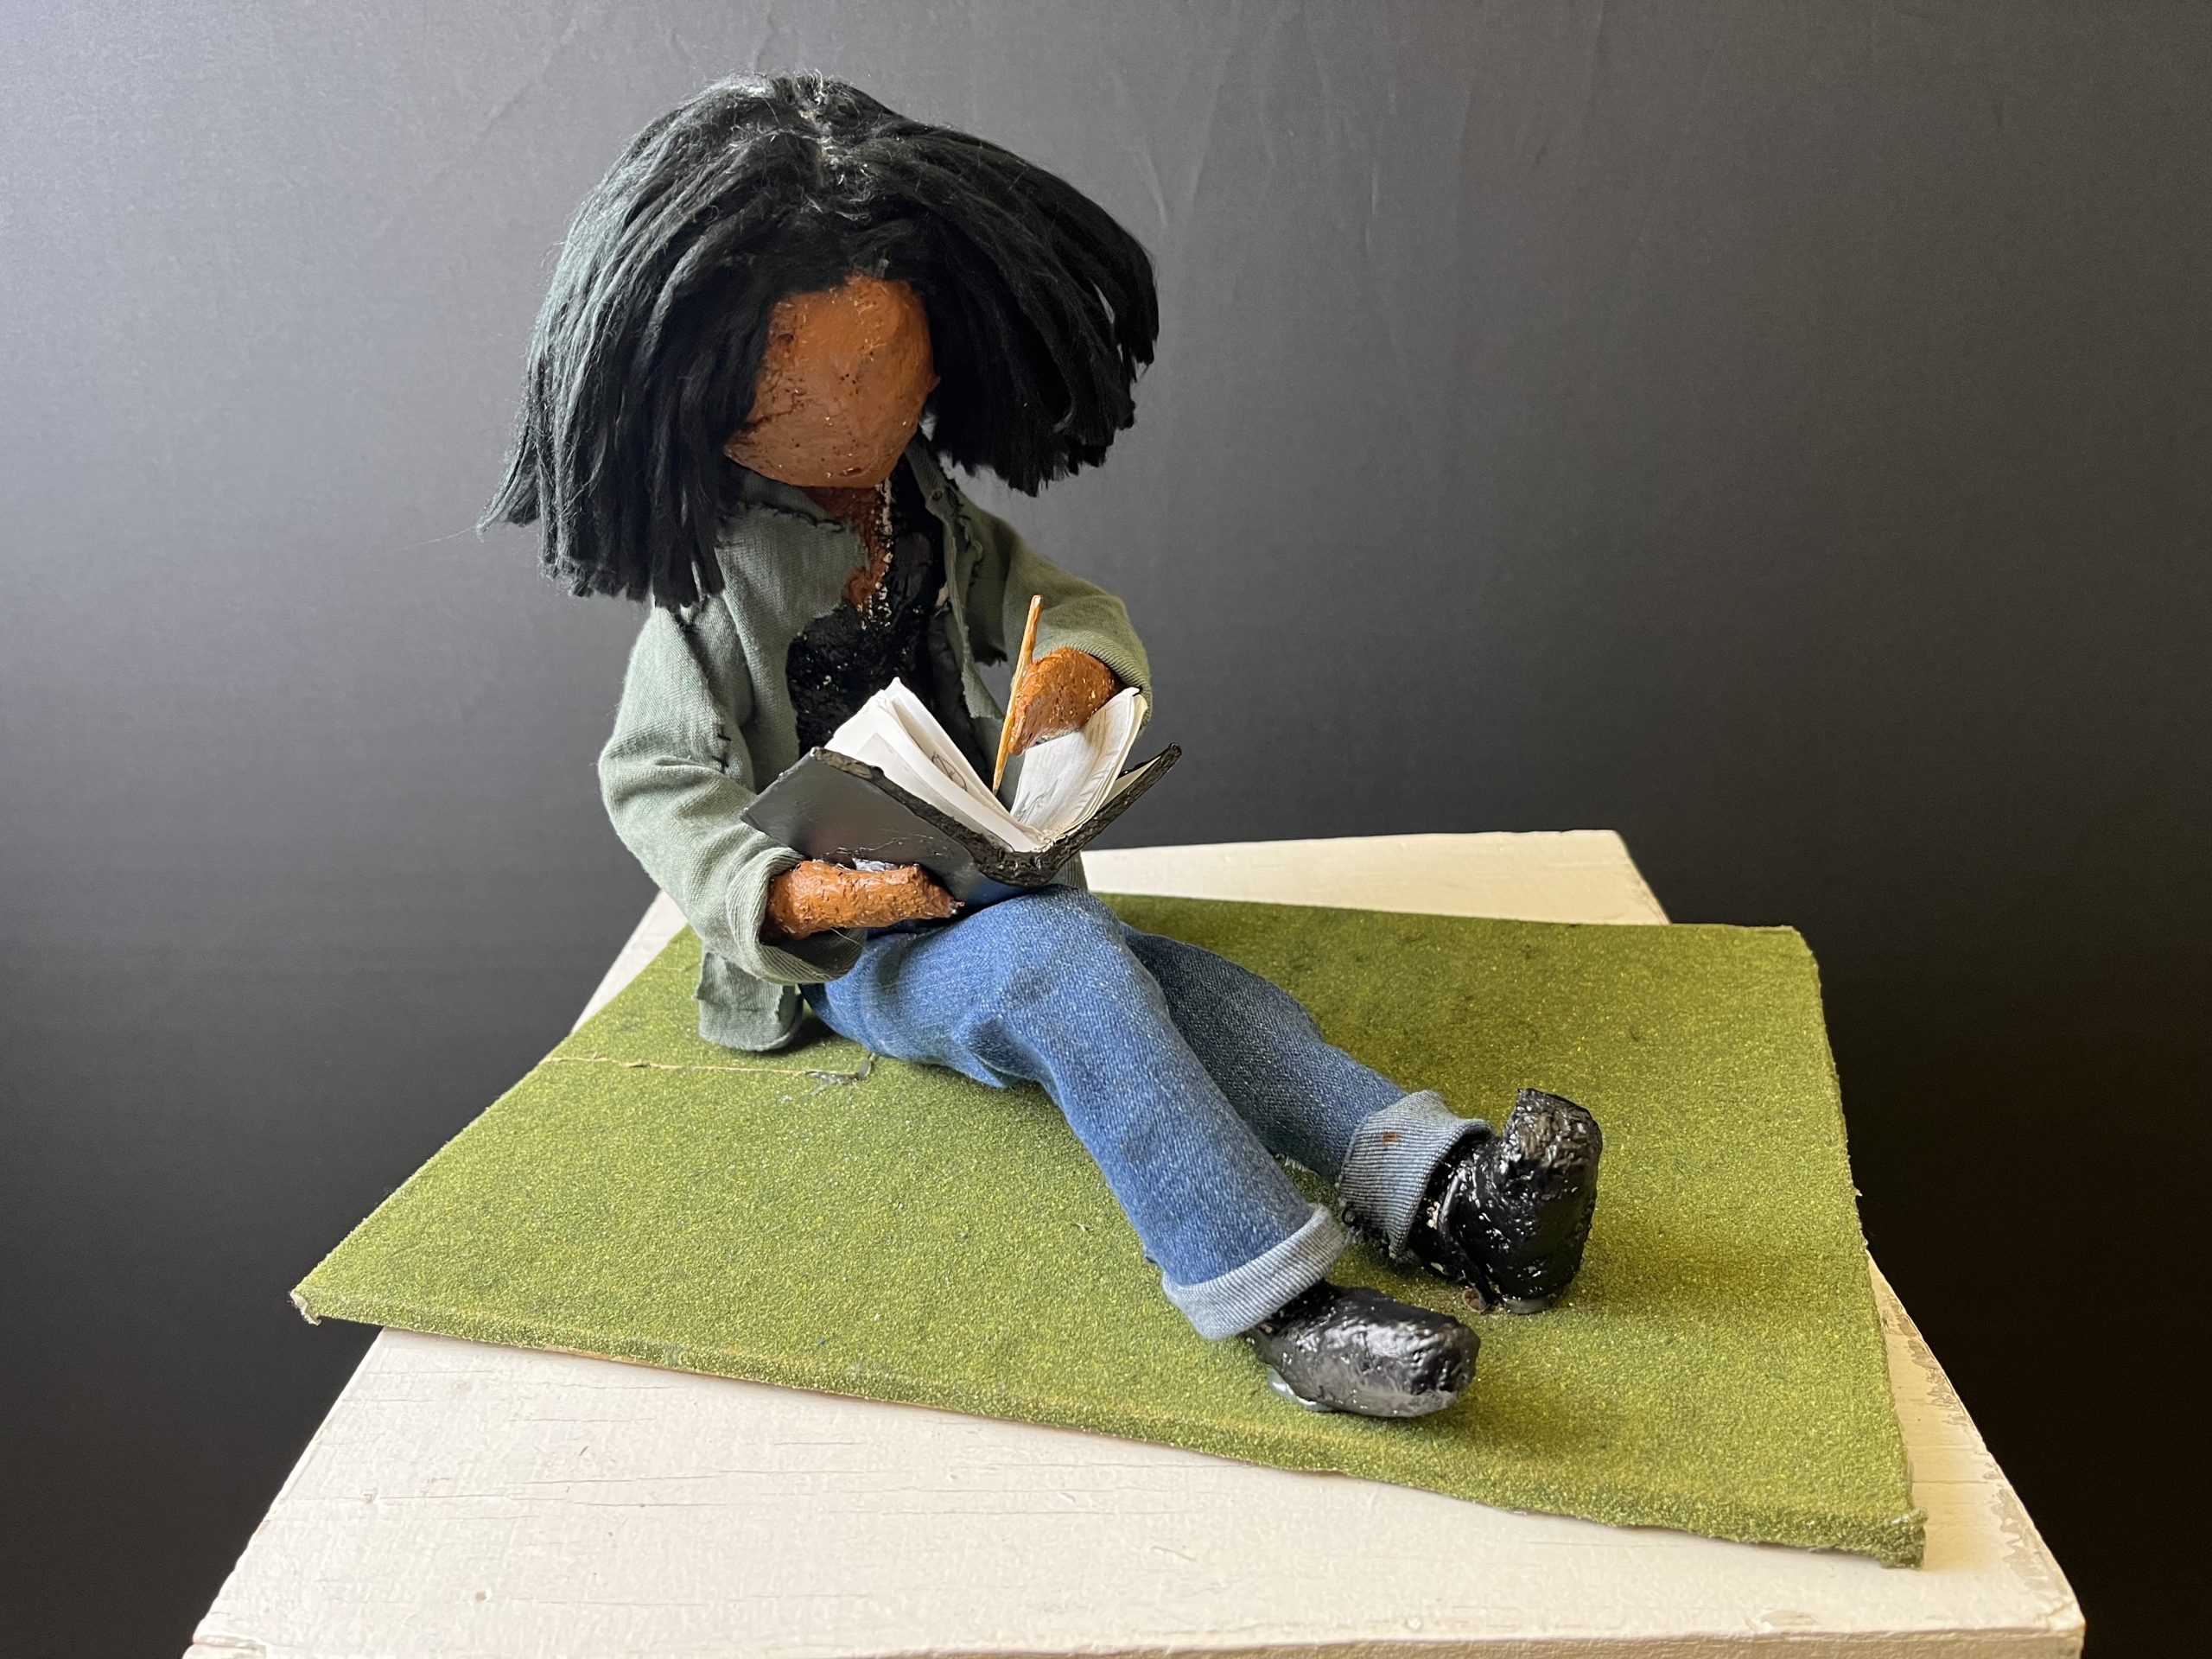 Student artwork; a sculpture of a student writing in a notebook